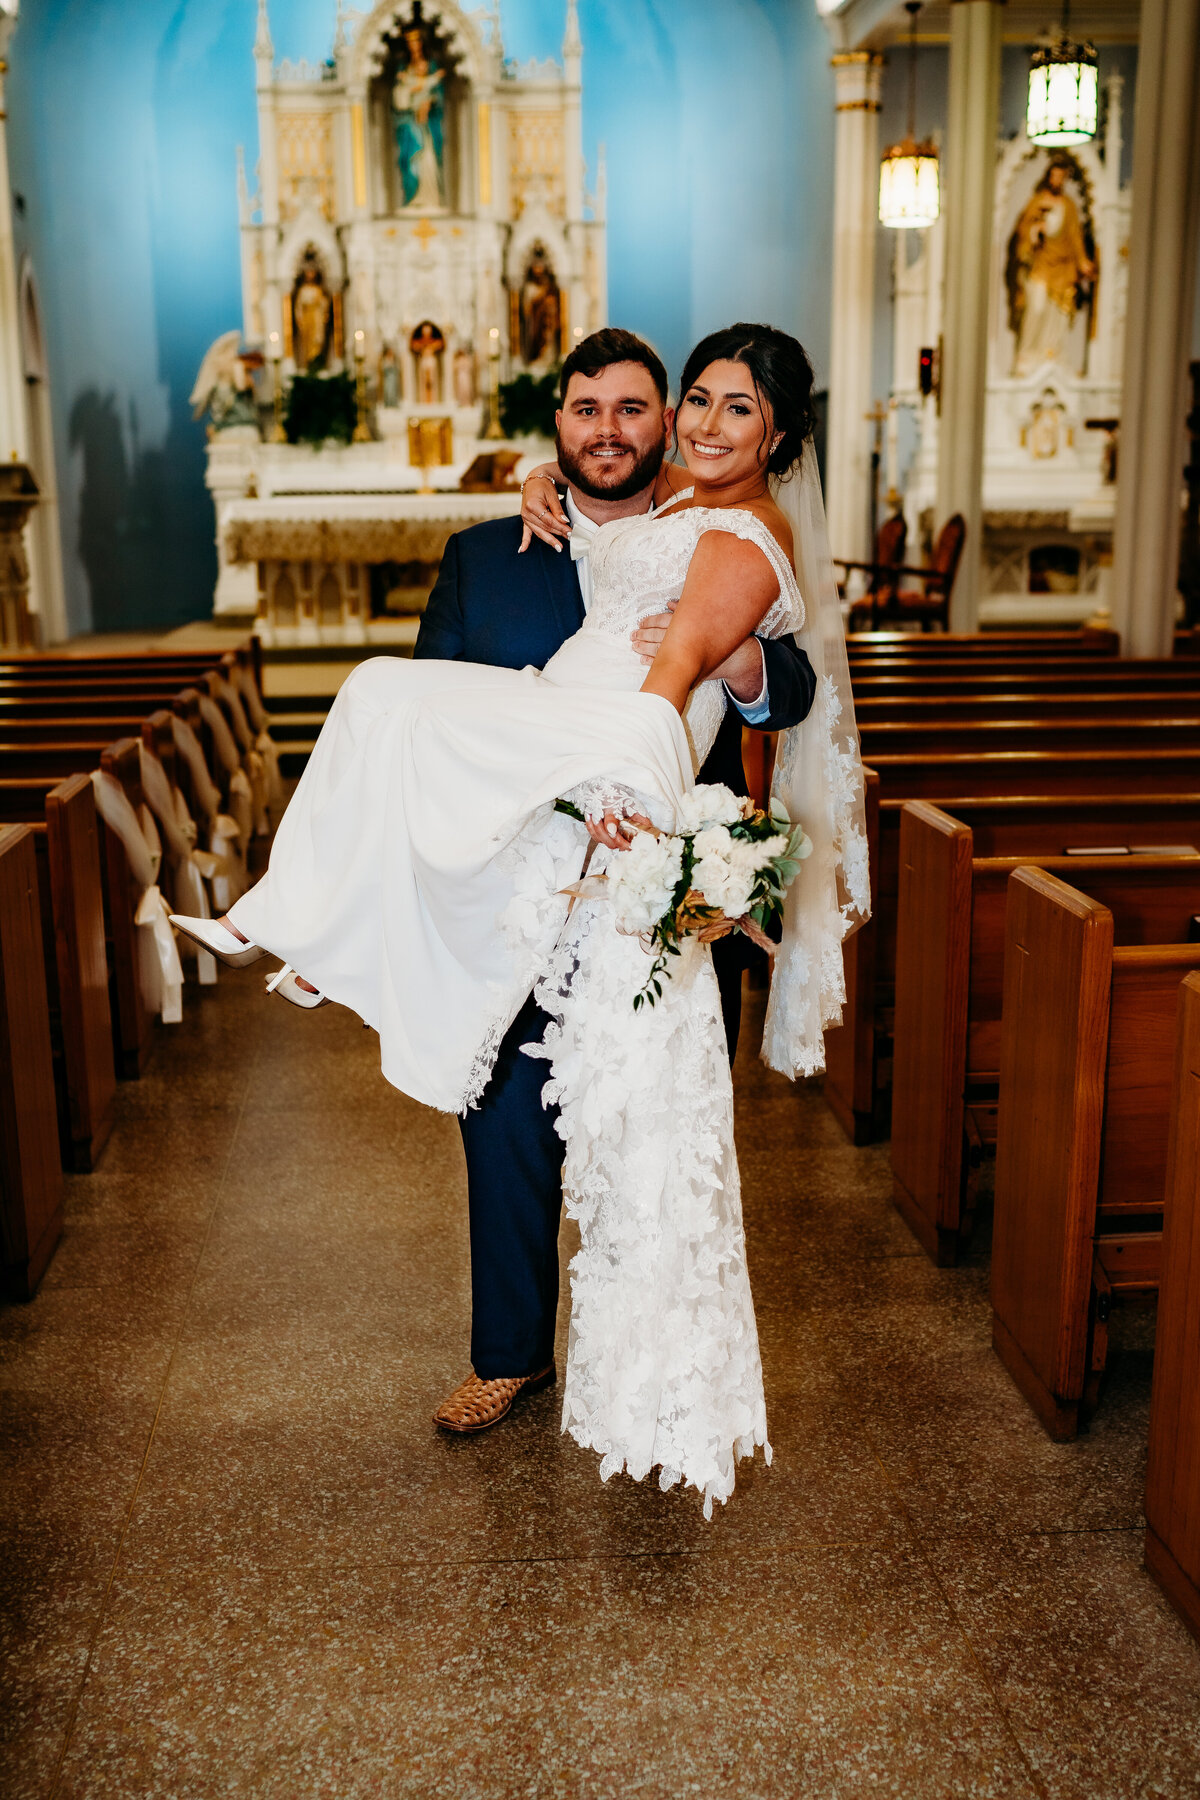 cute pose of groom carrying bride down the aisle in catholic church wedding in Delcambre, la